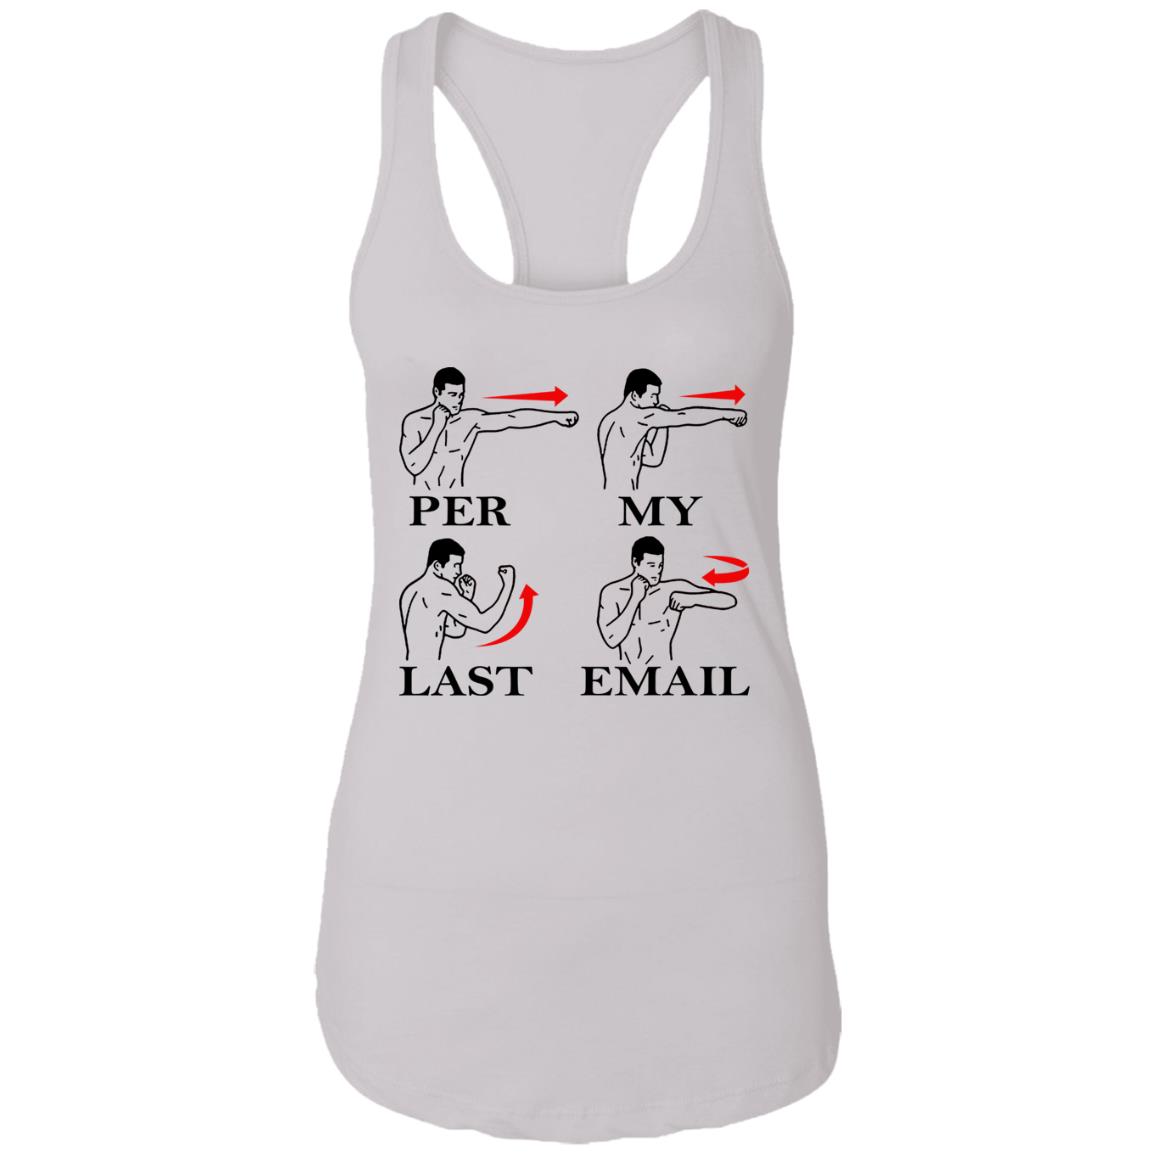 As per my last email Essential T-Shirt for Sale by Ukid